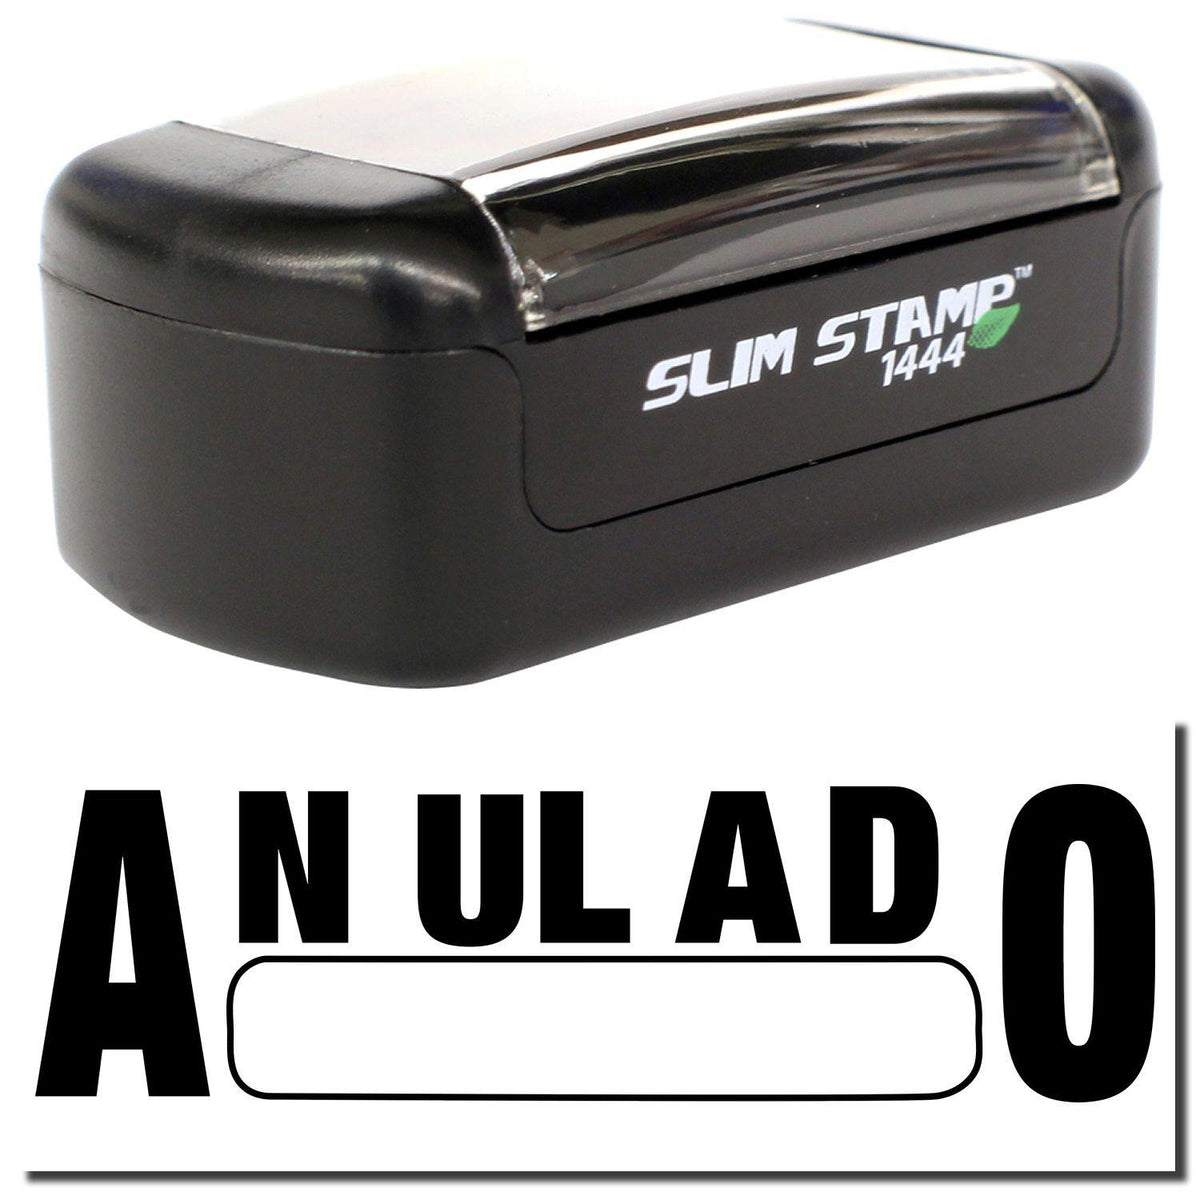 A stock office pre-inked stamp with a stamped image showing how the text &quot;ANULADO&quot; with a box is displayed after stamping.